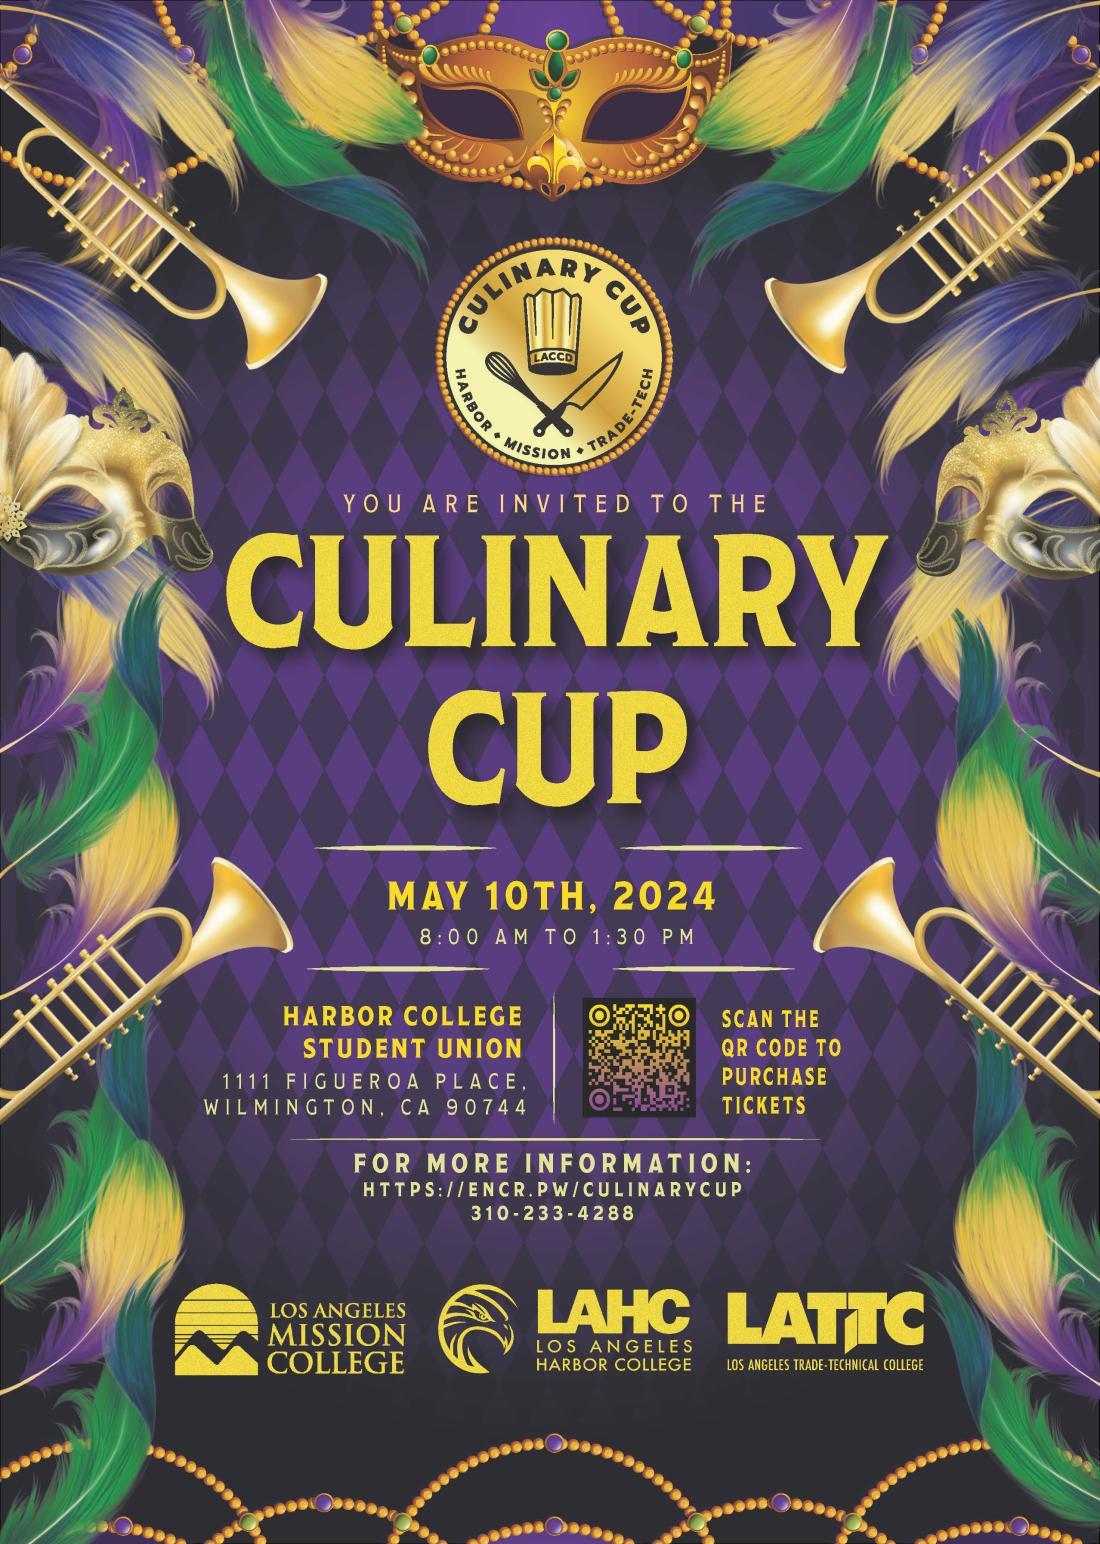 4th Annual LACCD Culinary Cup – May 10 at Los Angeles Harbor College